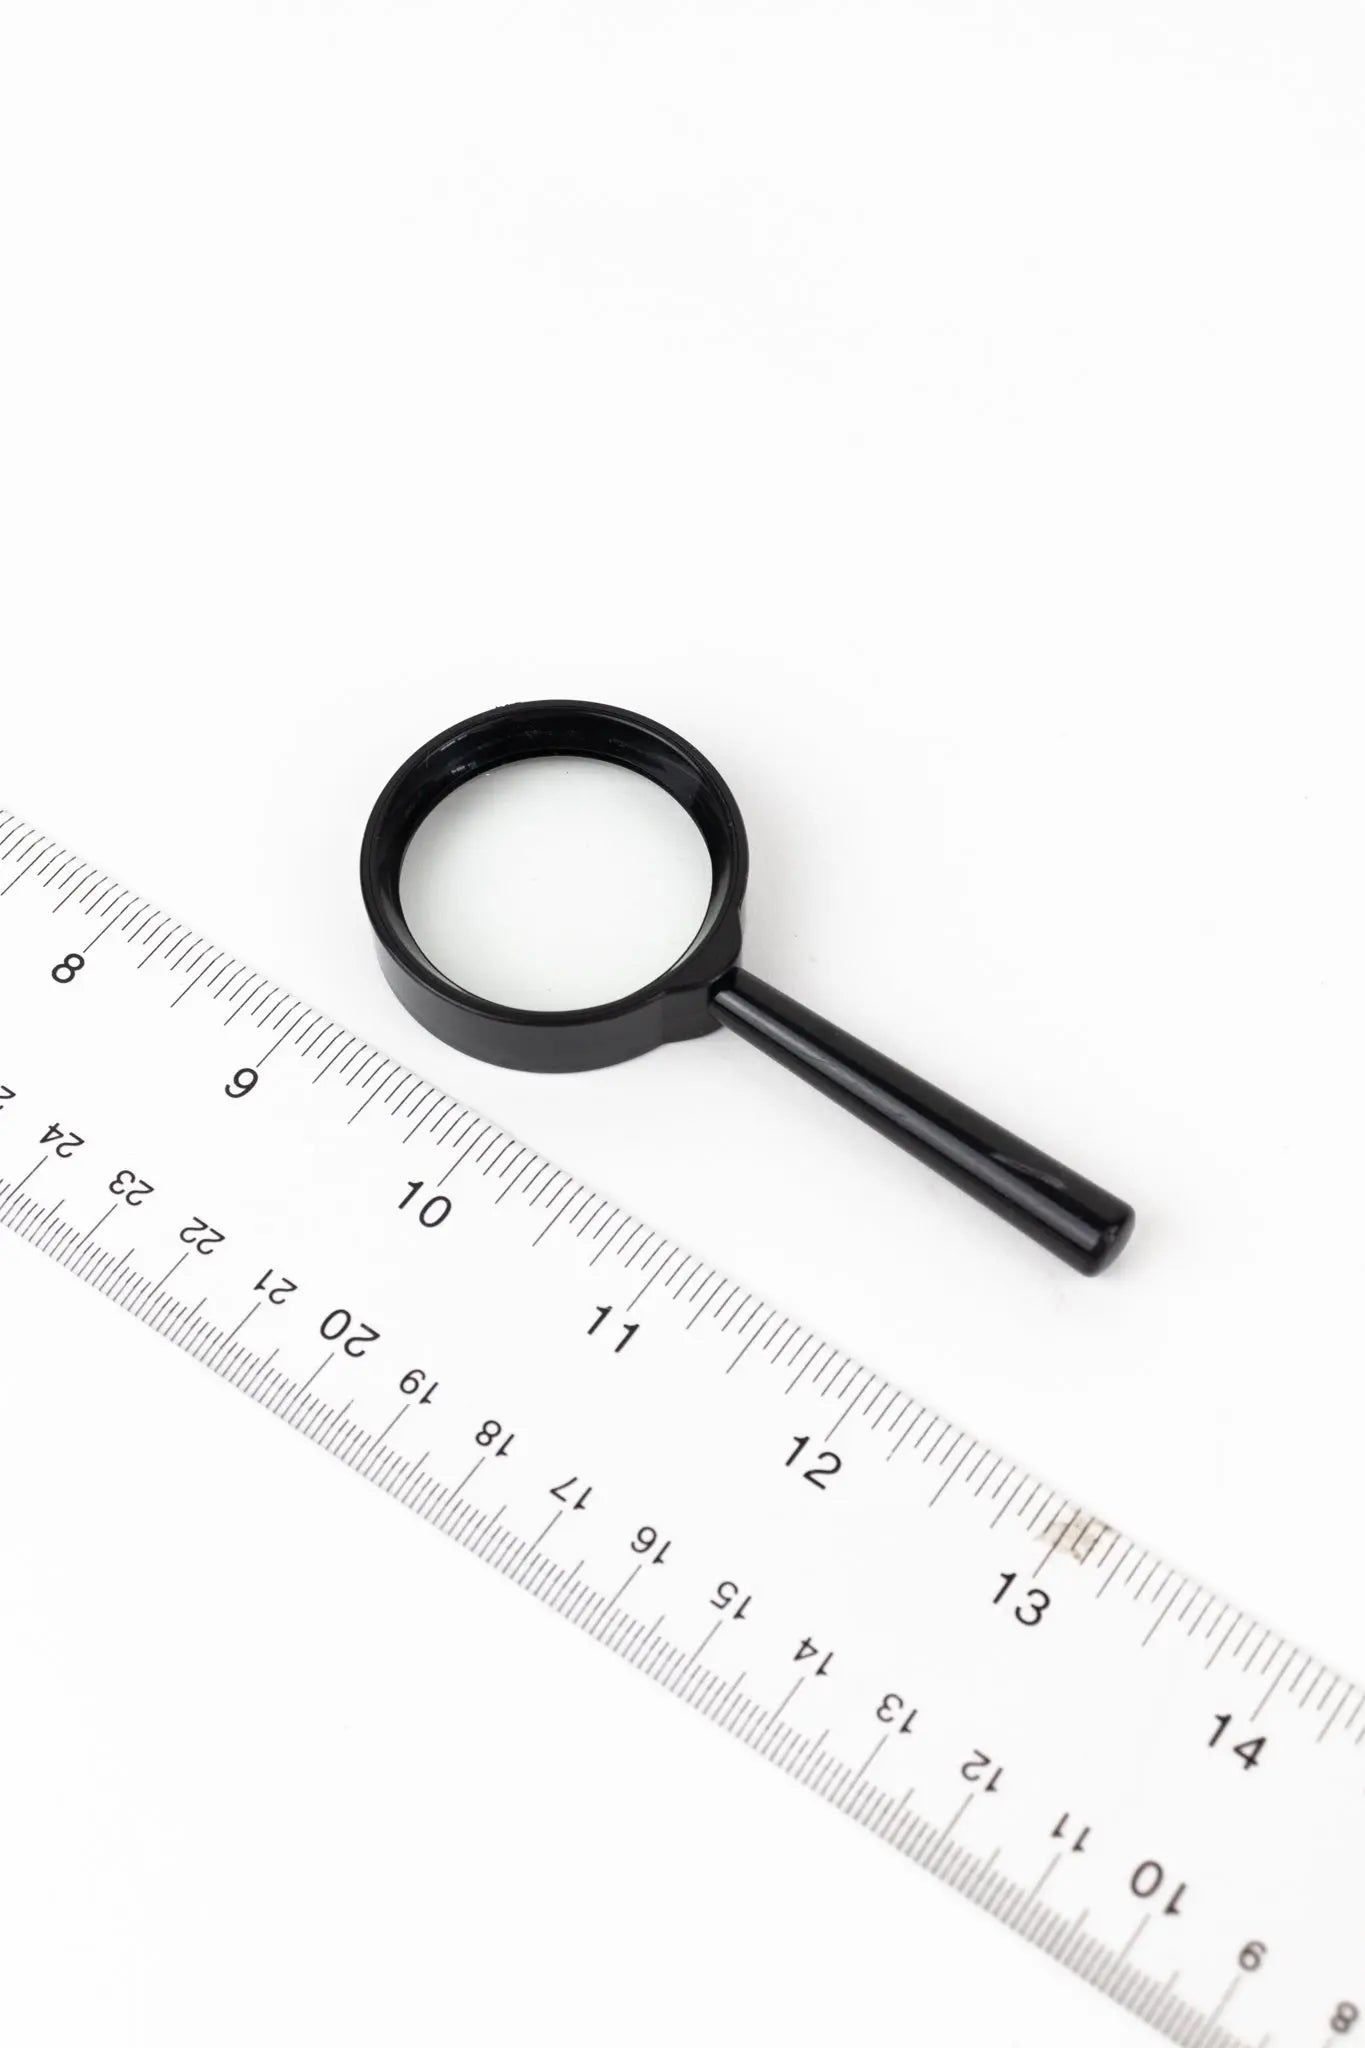 Magnifying Glass - Stemcell Science Shop